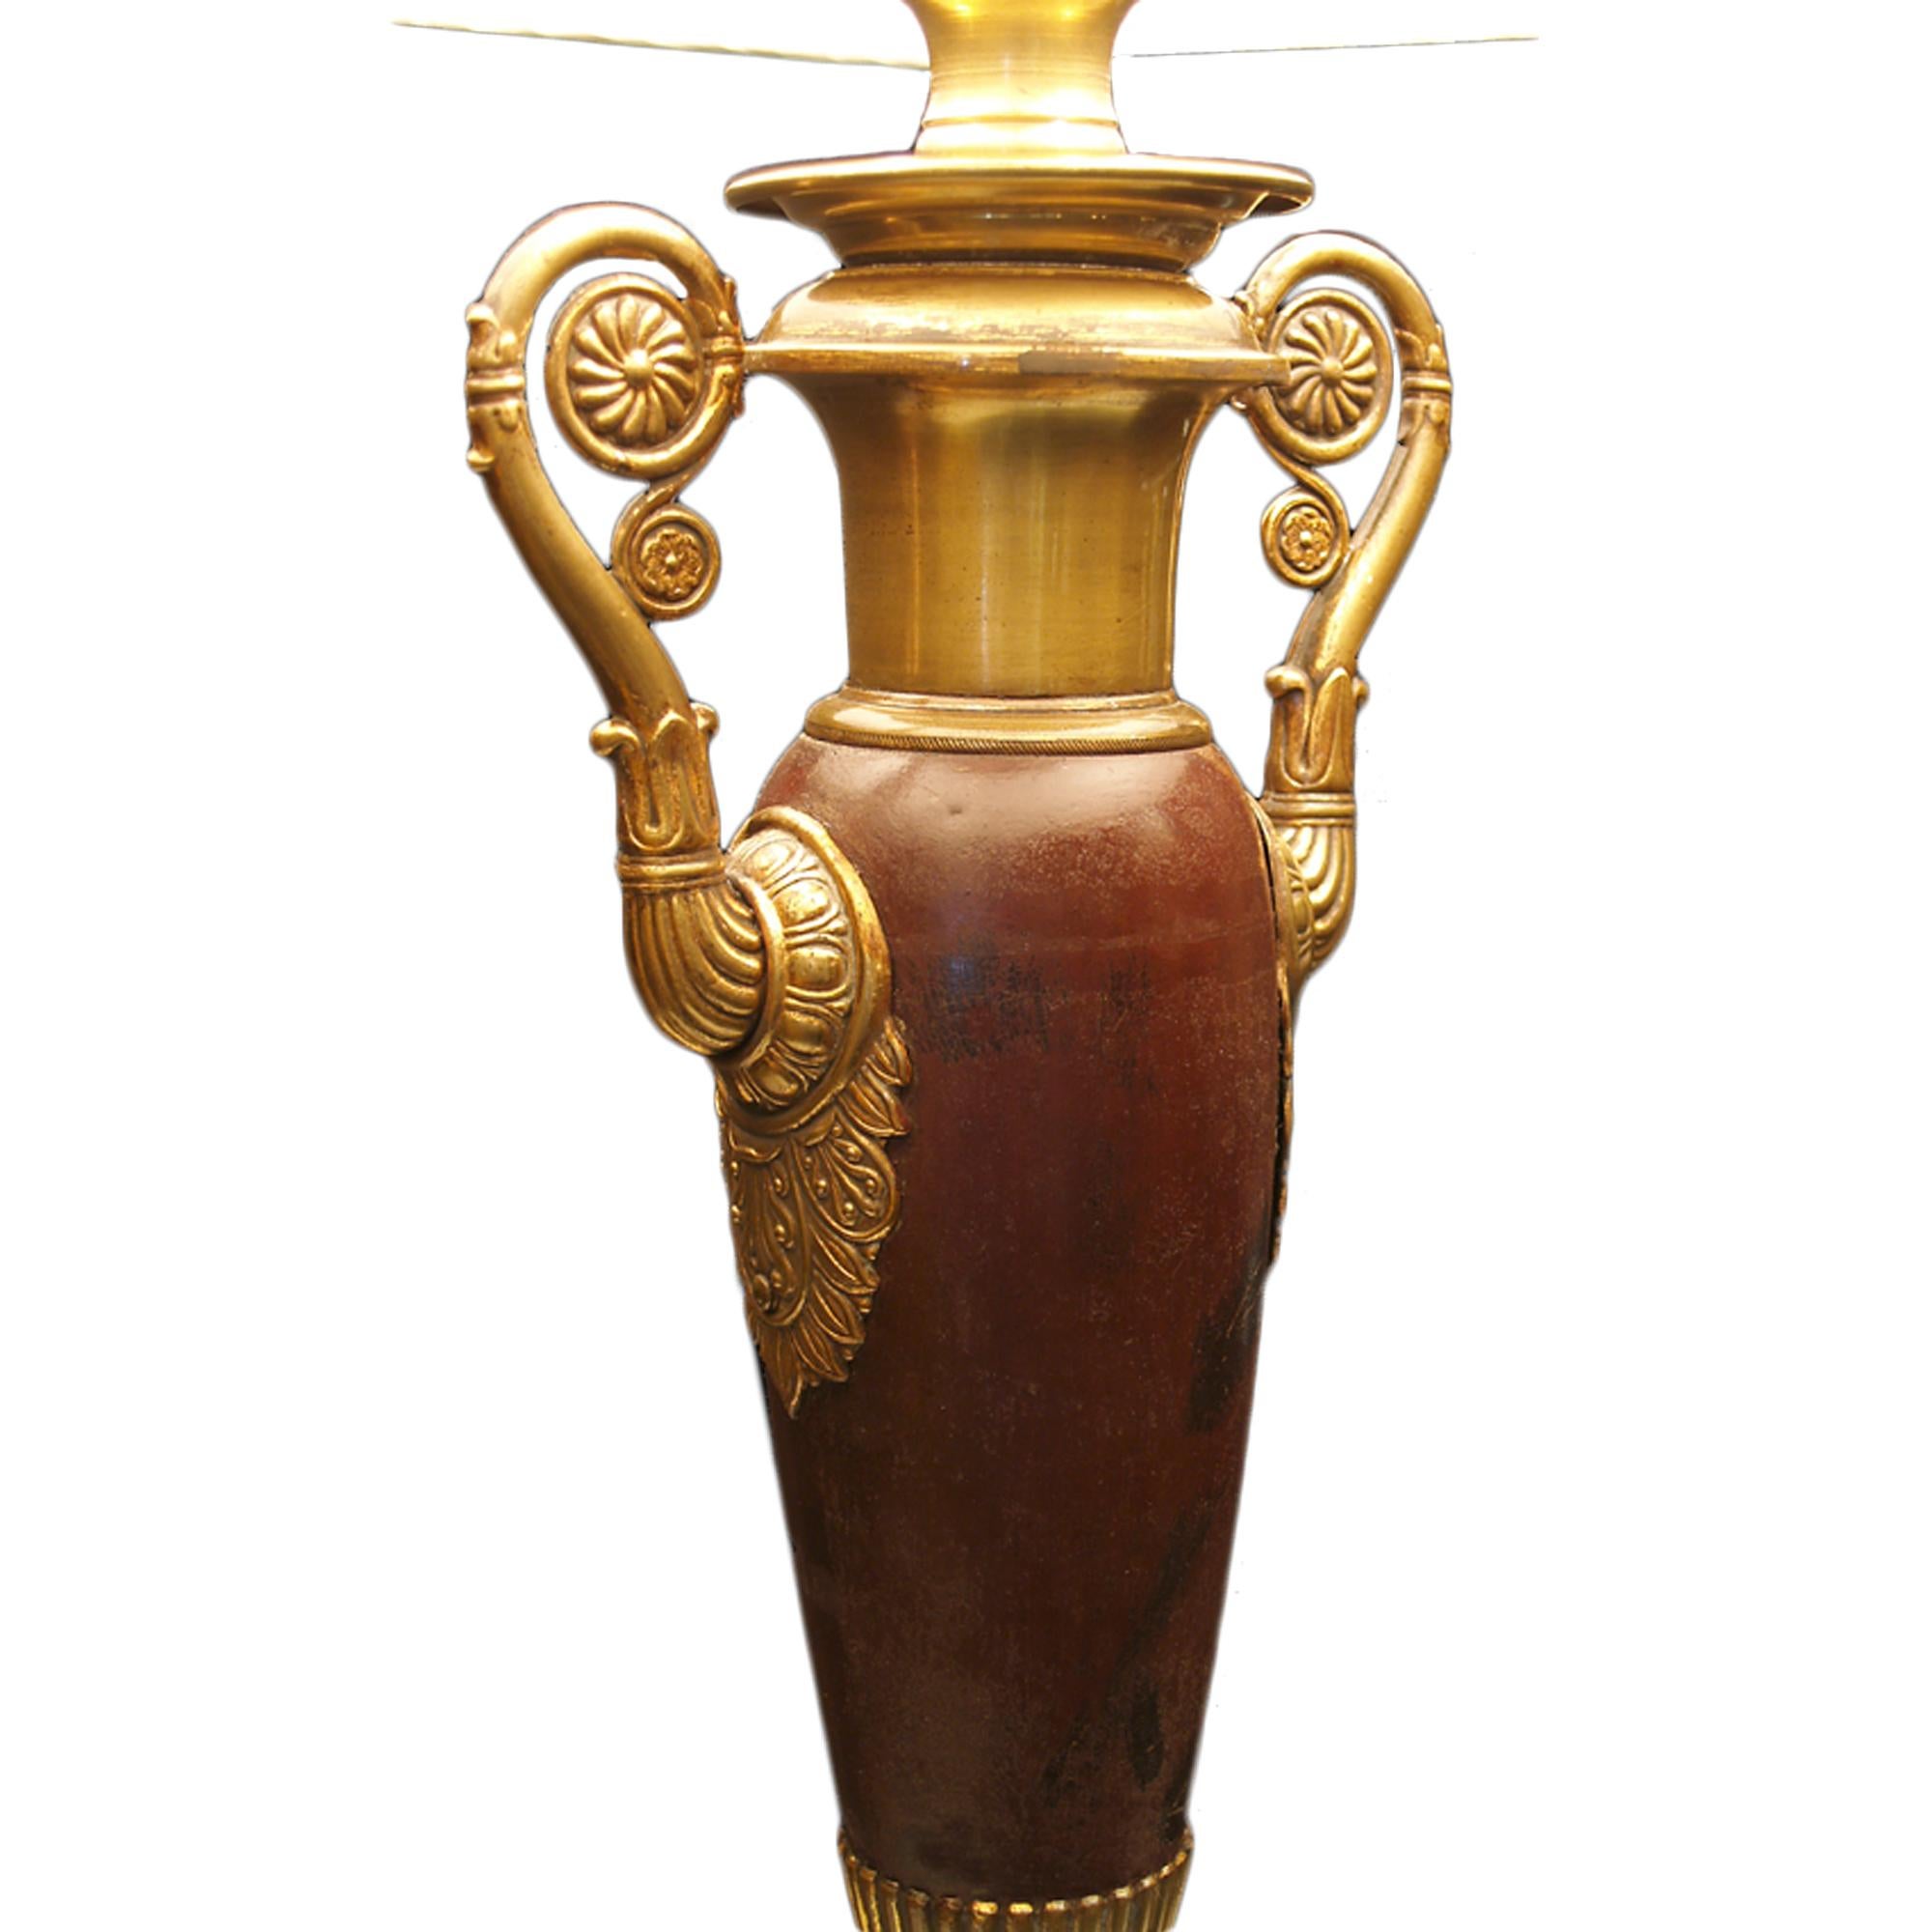 A very attractive 19th century Neo-Classical st. metal lamp with a patinated bronze finish. The lamp is raised on a square base with a bronze color border of acanthus leaves. Above is the urn shape on gilt metal reeded pedestal with scrolled gilt